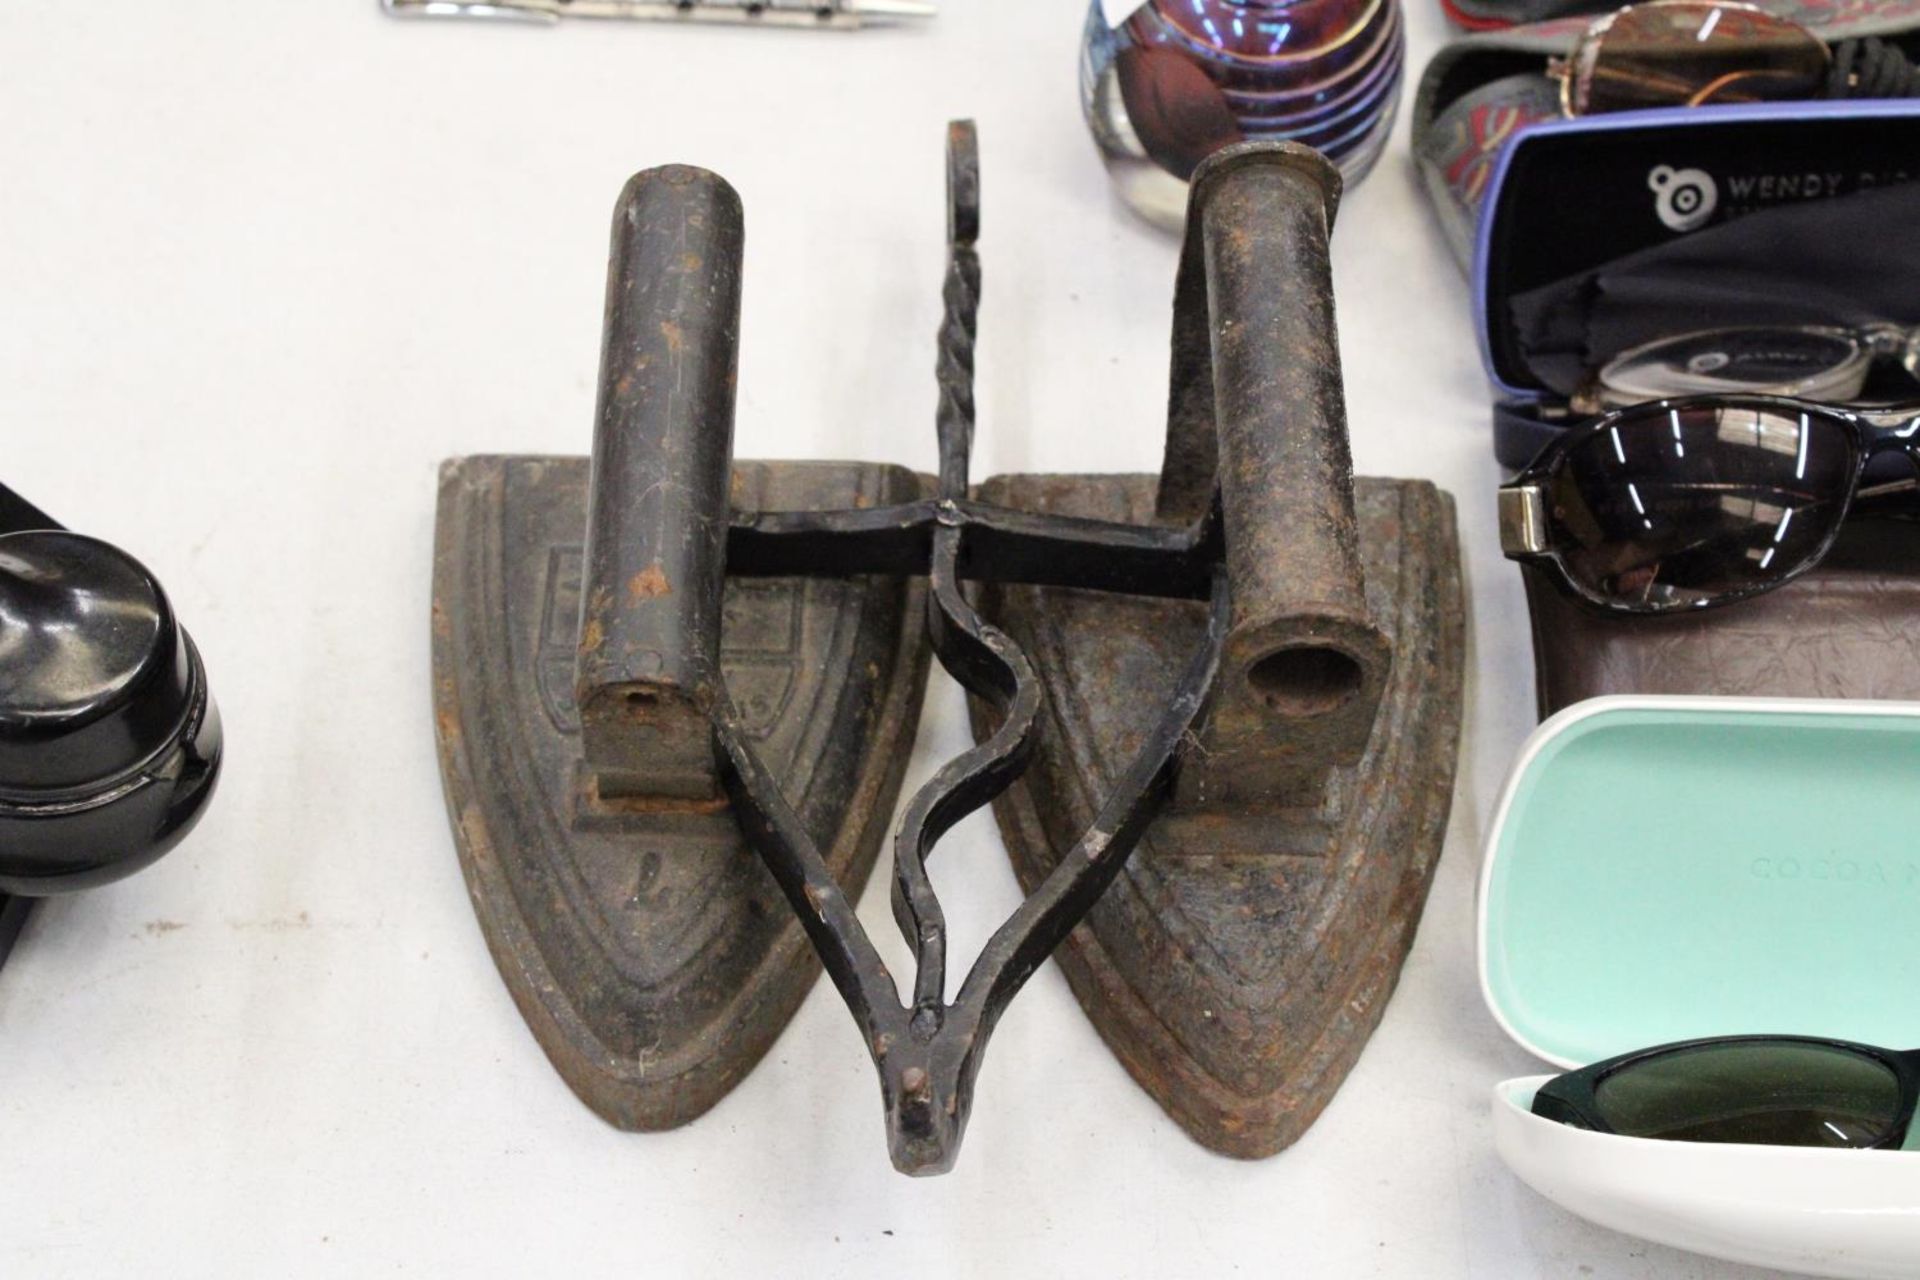 TWO VICTORIAN FLAT IRONS AND AN IRON TRIVET